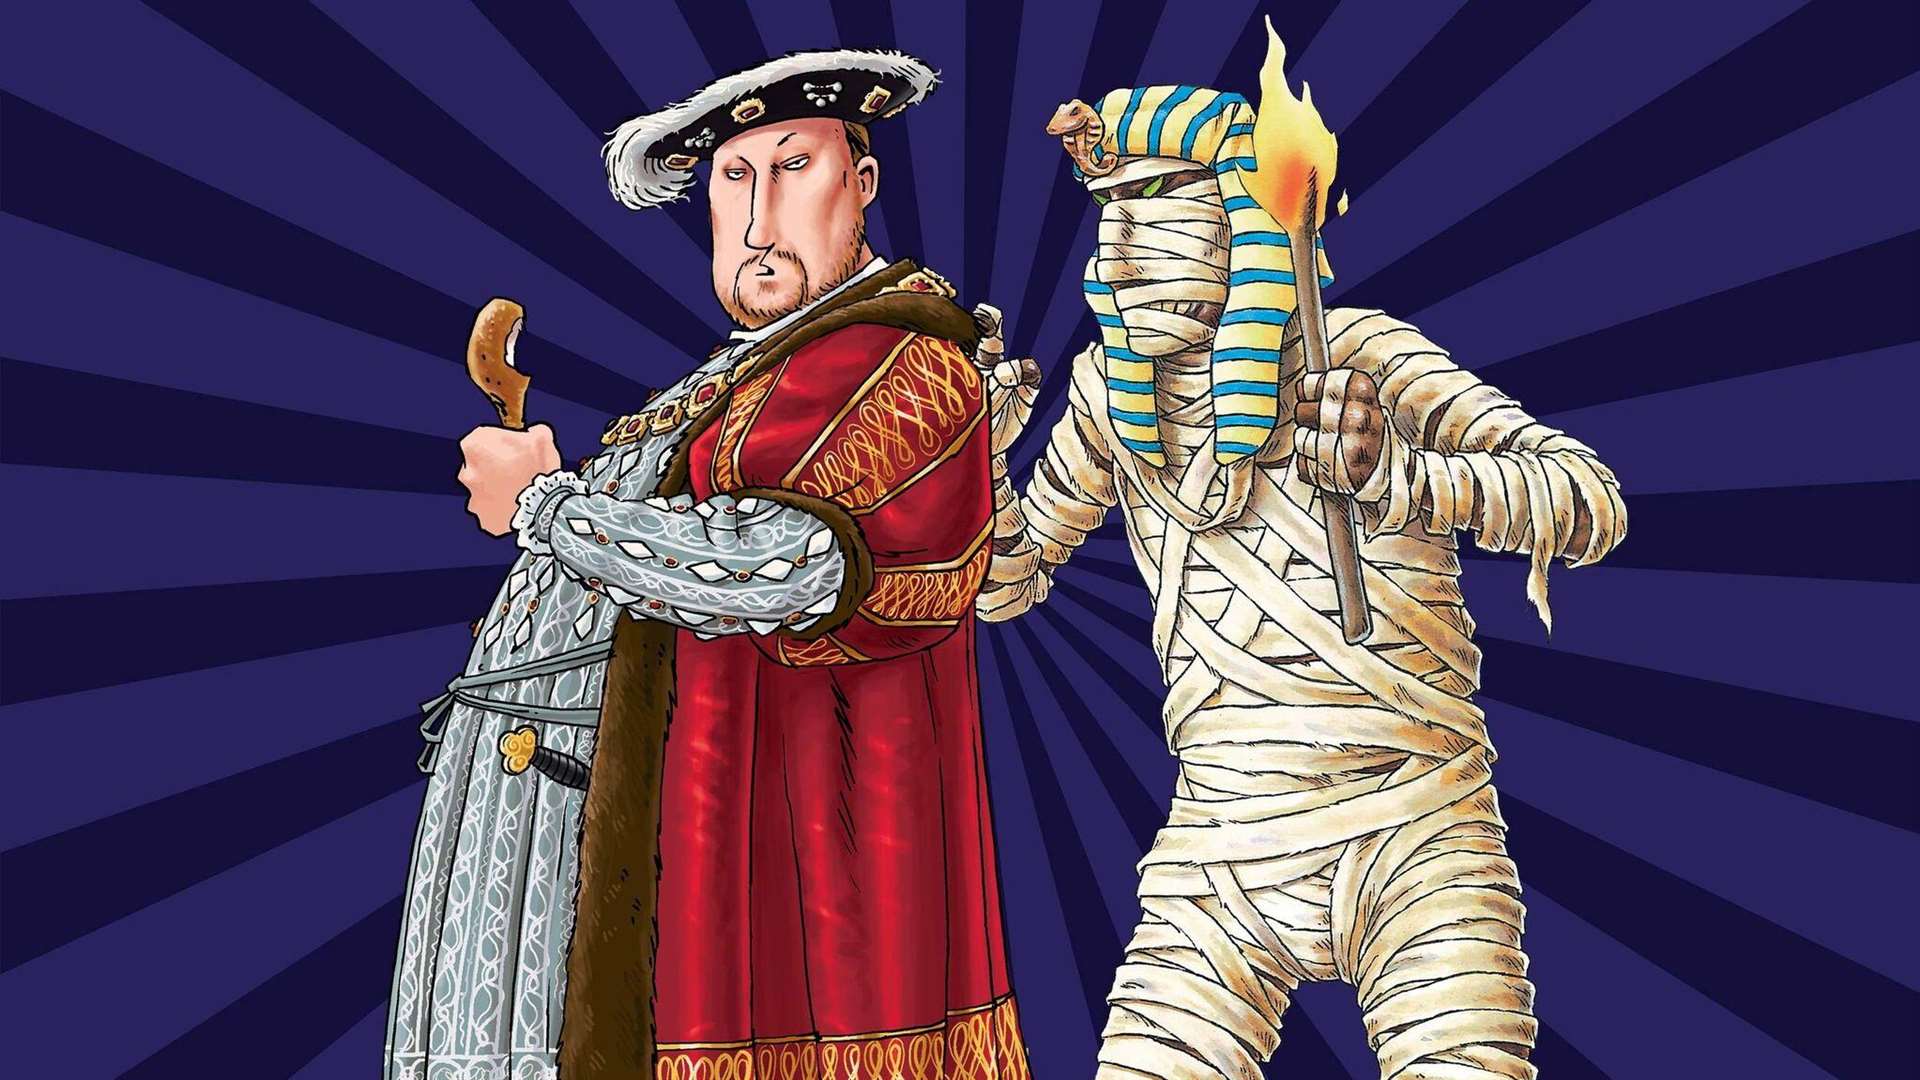 Horrible Histories is coming to the Orchard